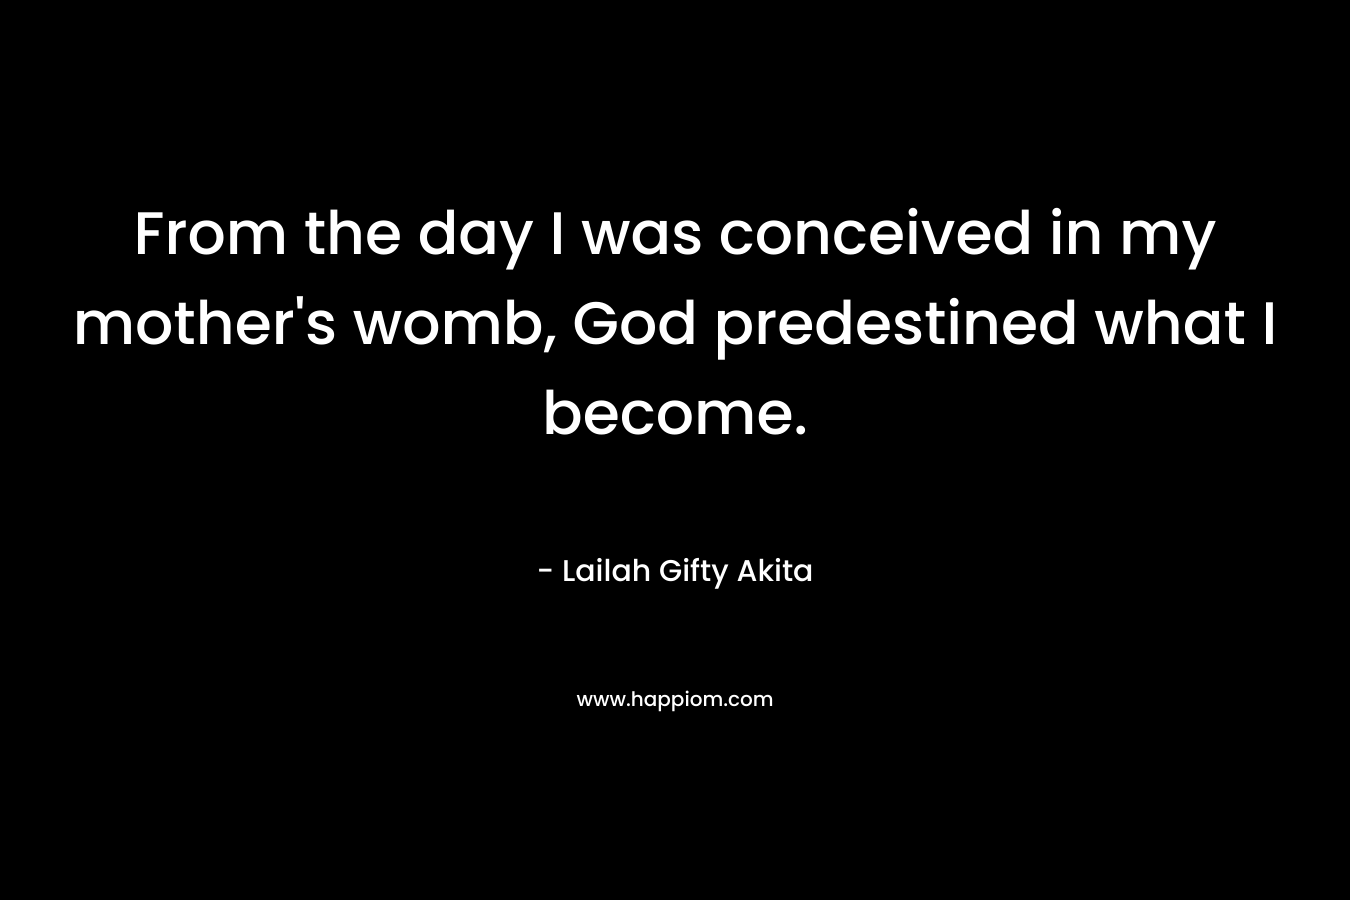 From the day I was conceived in my mother’s womb, God predestined what I become. – Lailah Gifty Akita